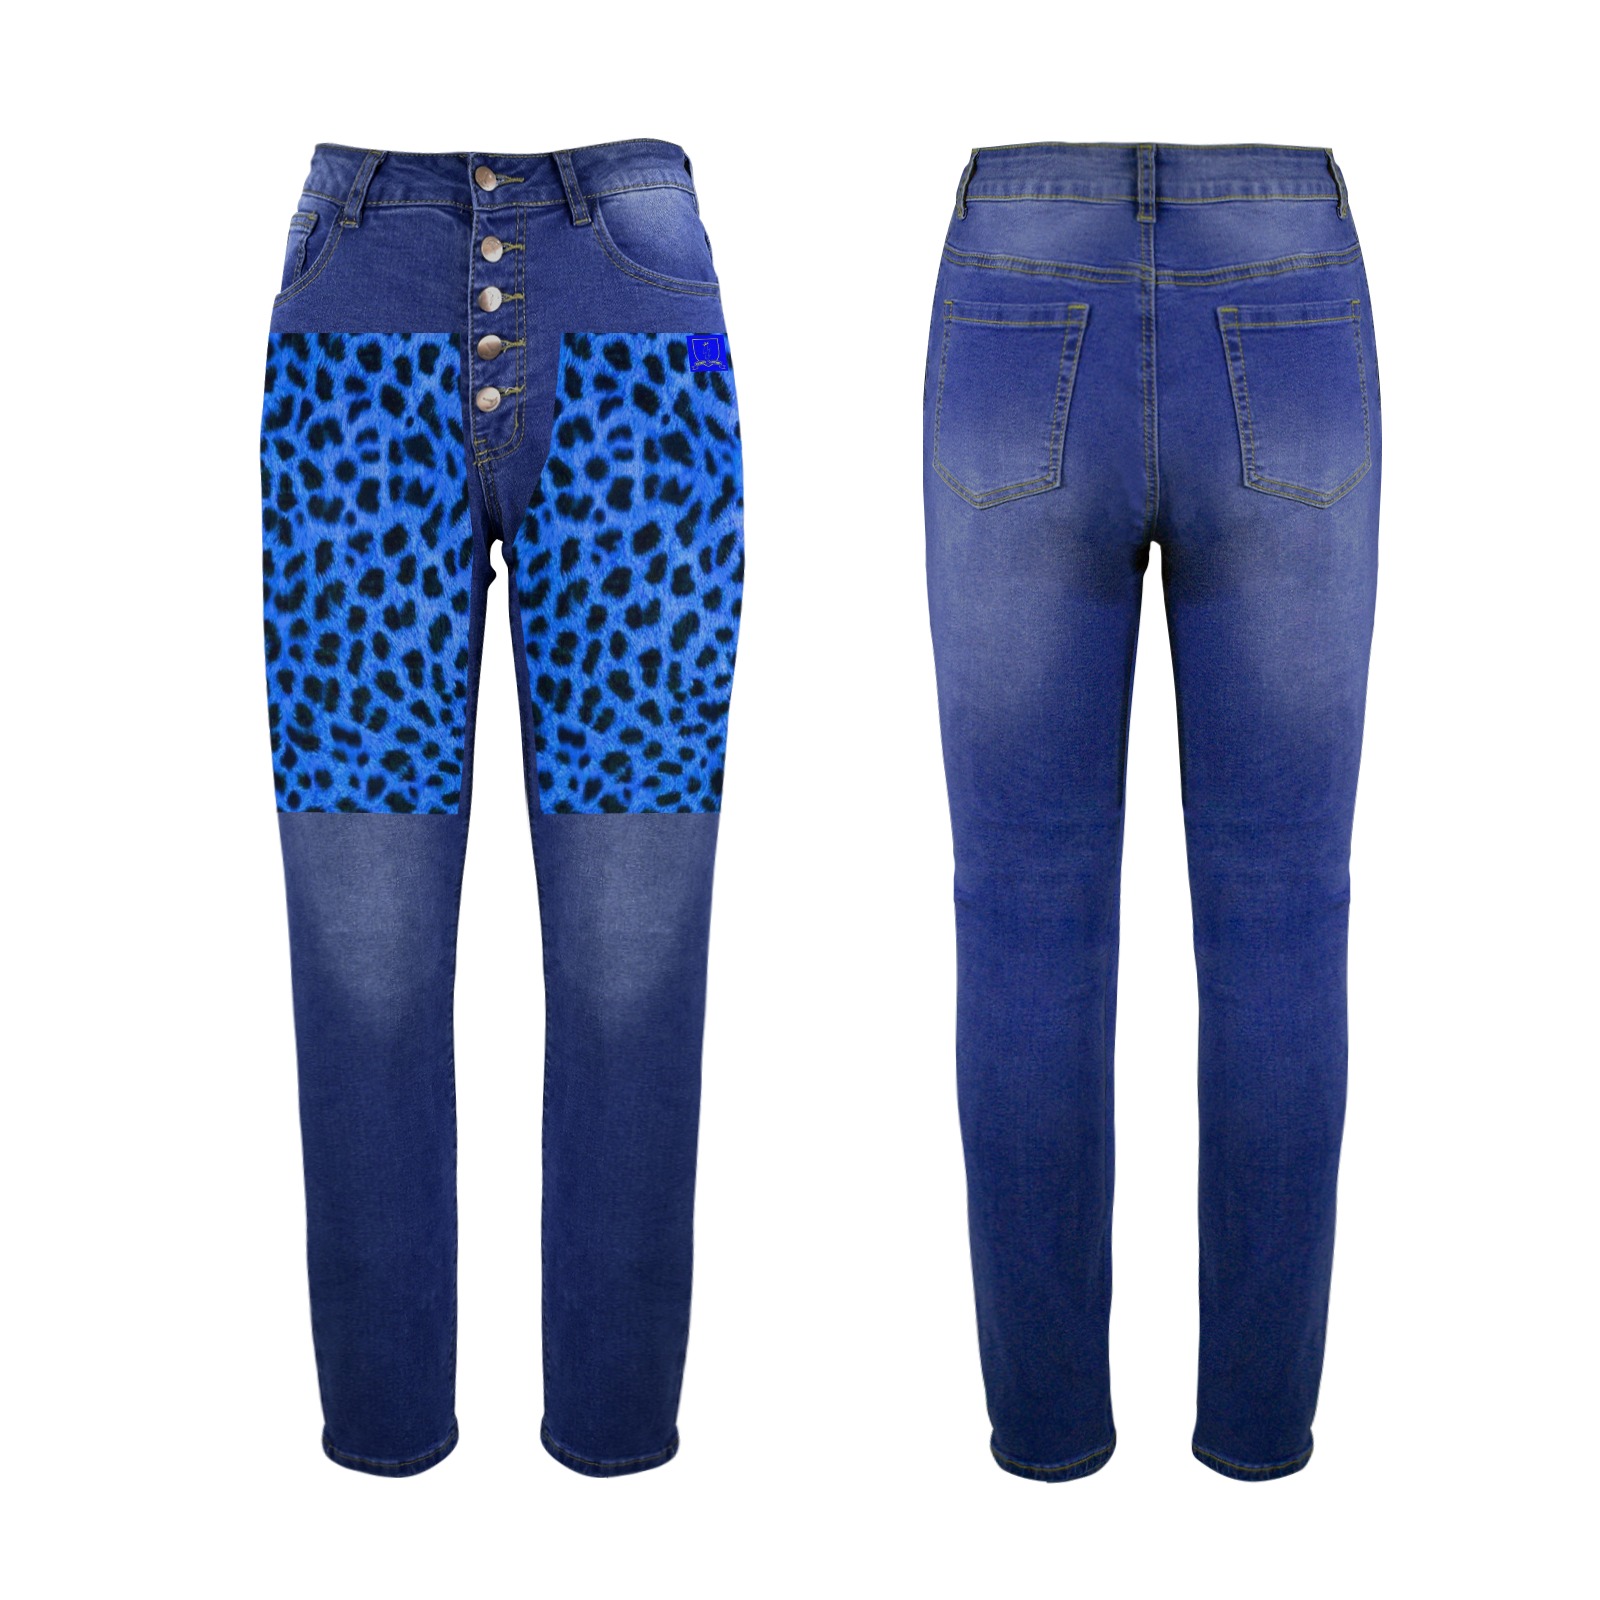 DIONIO Clothing - Ladies' Half - Blue Cheetah Jeans Women's Jeans (Front Printing) (Model L75)